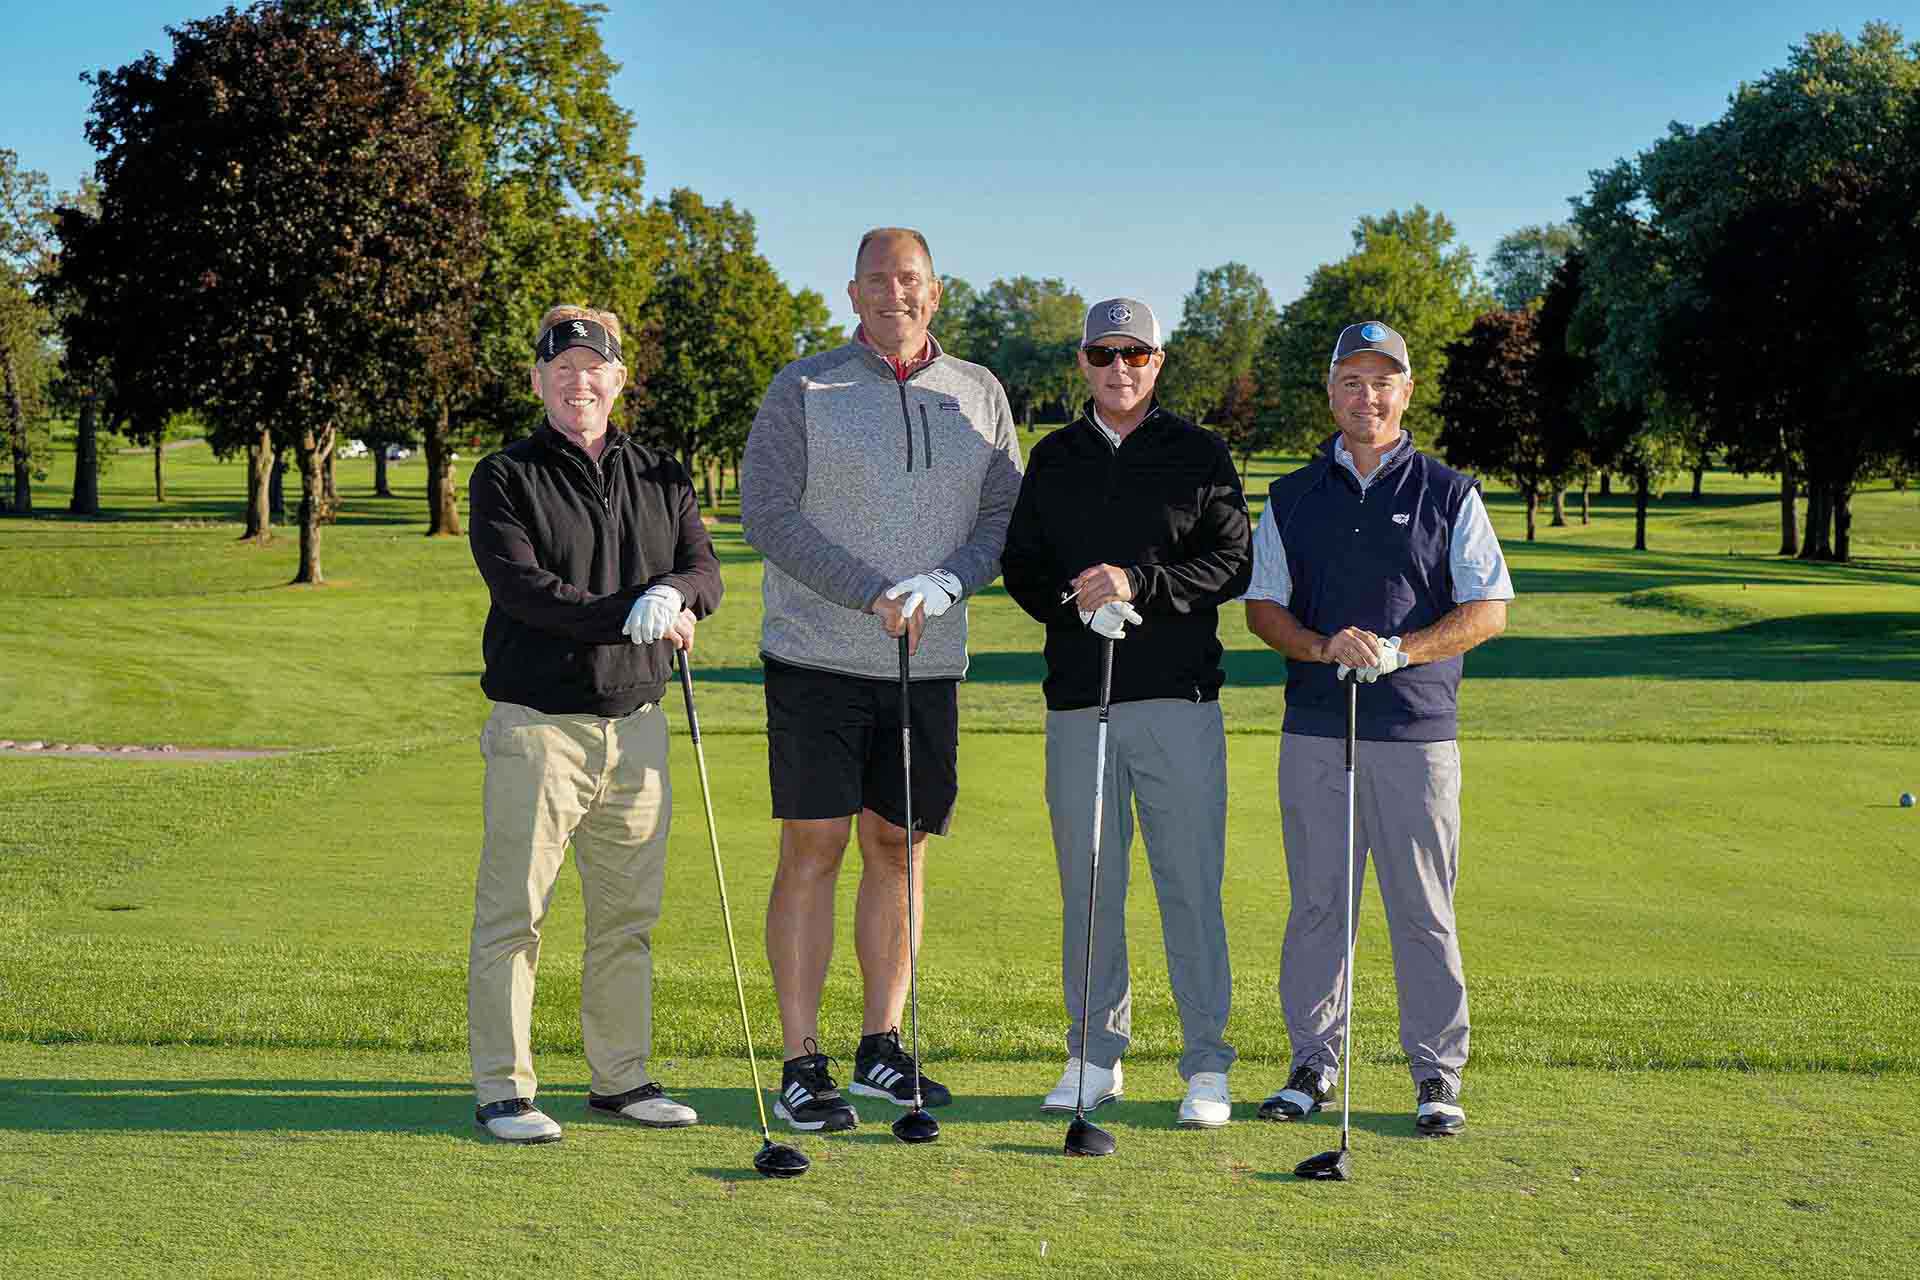 2020-endownment-classic-four-golfers-smile-for-group-photo